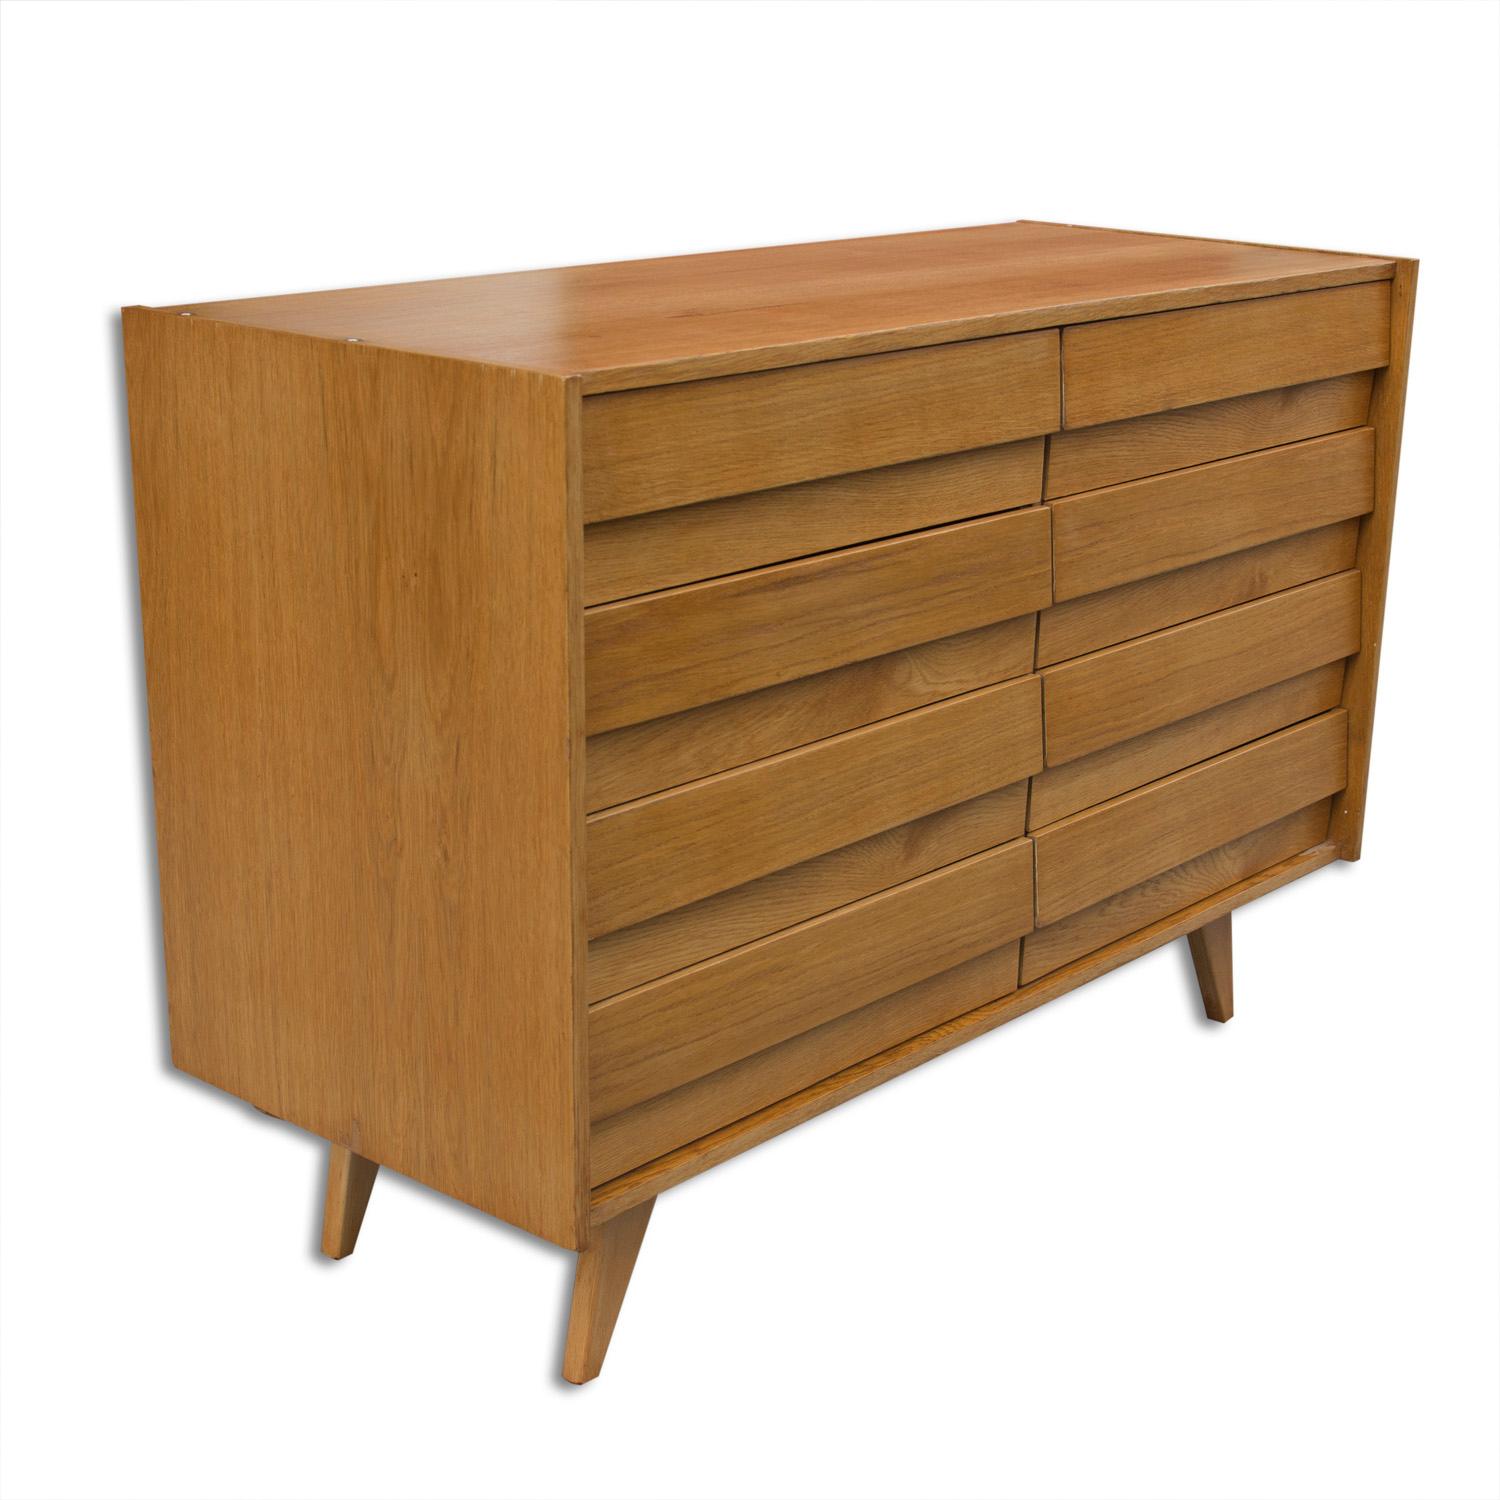 This beech and plywood sideboard, model U-458, was designed by Jirí Jiroutek and produced by Interier Praha during the 1960s. This model is associated with the world-renowned Brussels period Expo 58 and features eight drawers. The unit is in